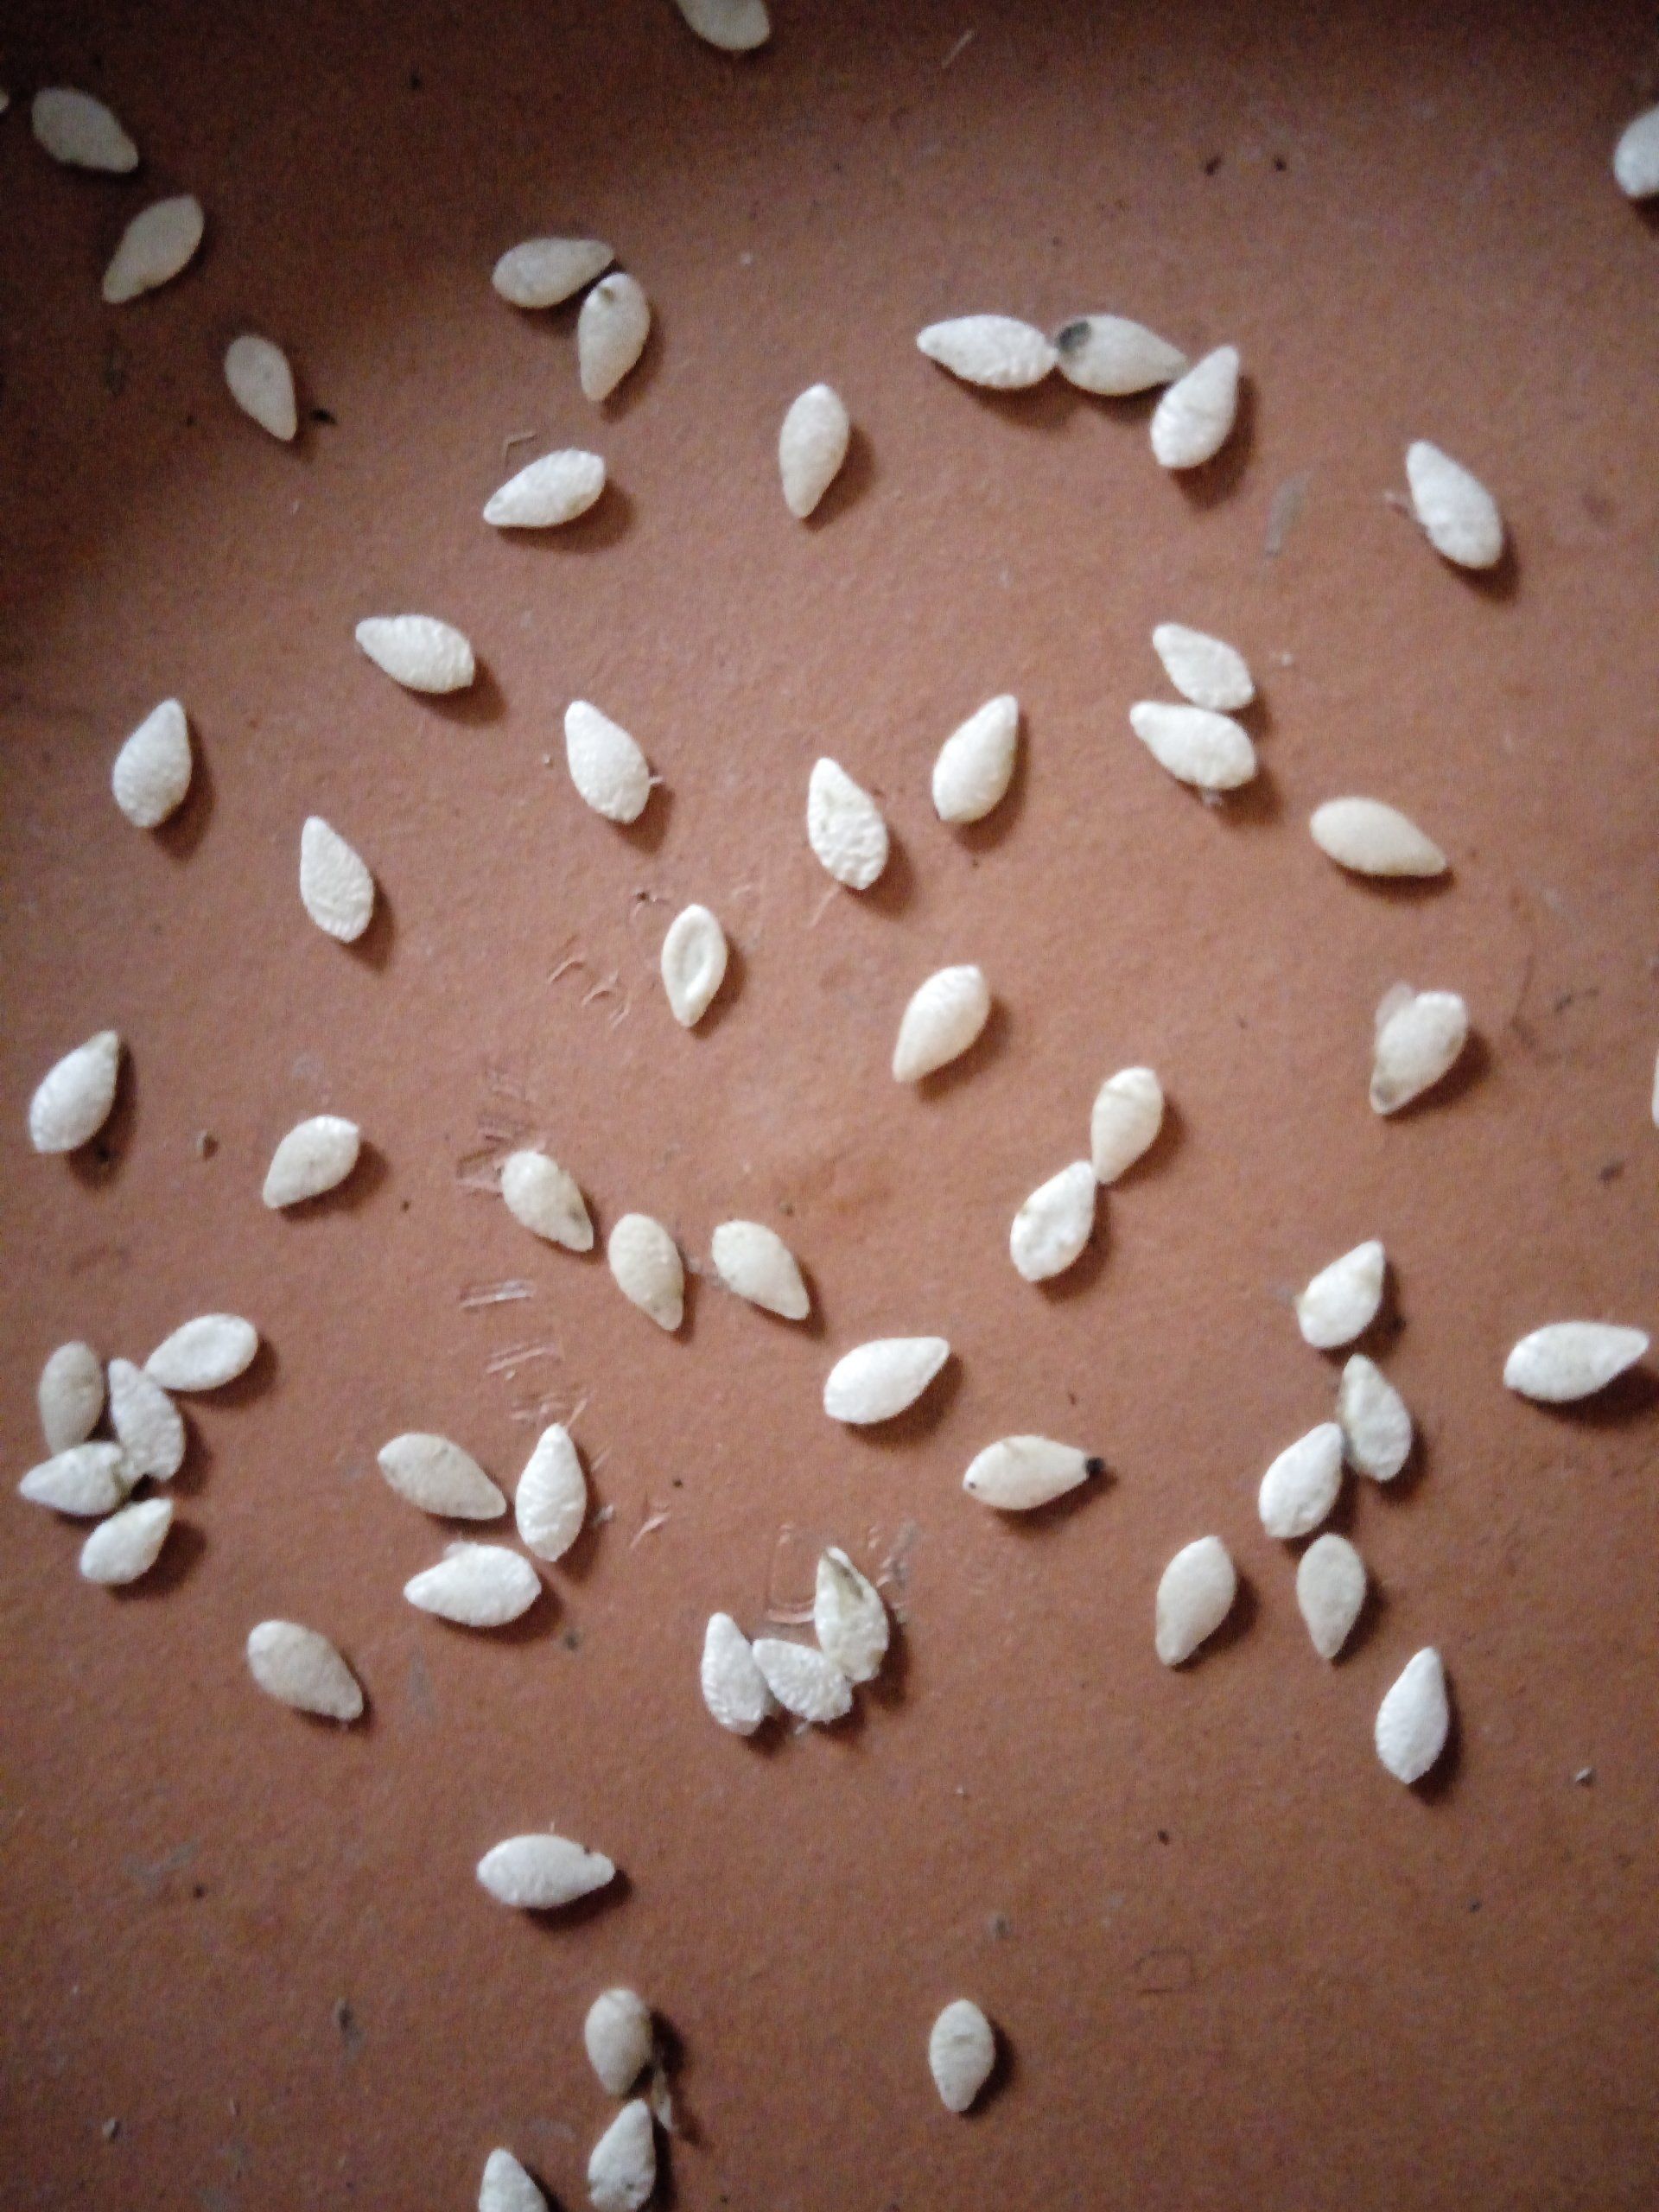 Cucamelon Seeds Drying on a Terracotta Saucer